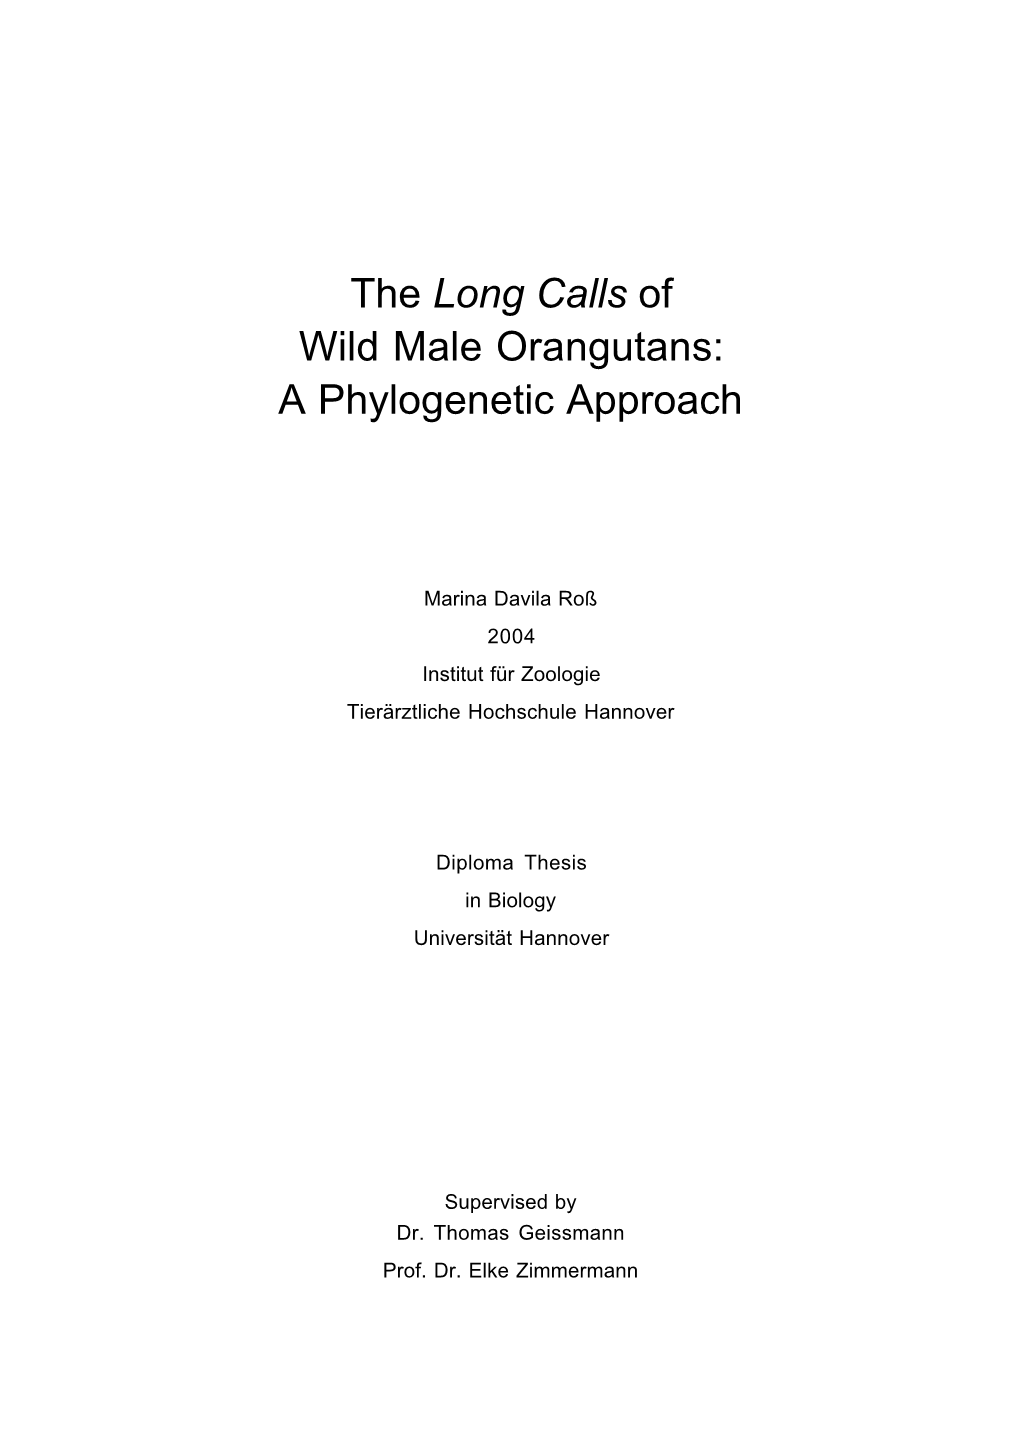 The Long Calls of Wild Male Orangutans: a Phylogenetic Approach